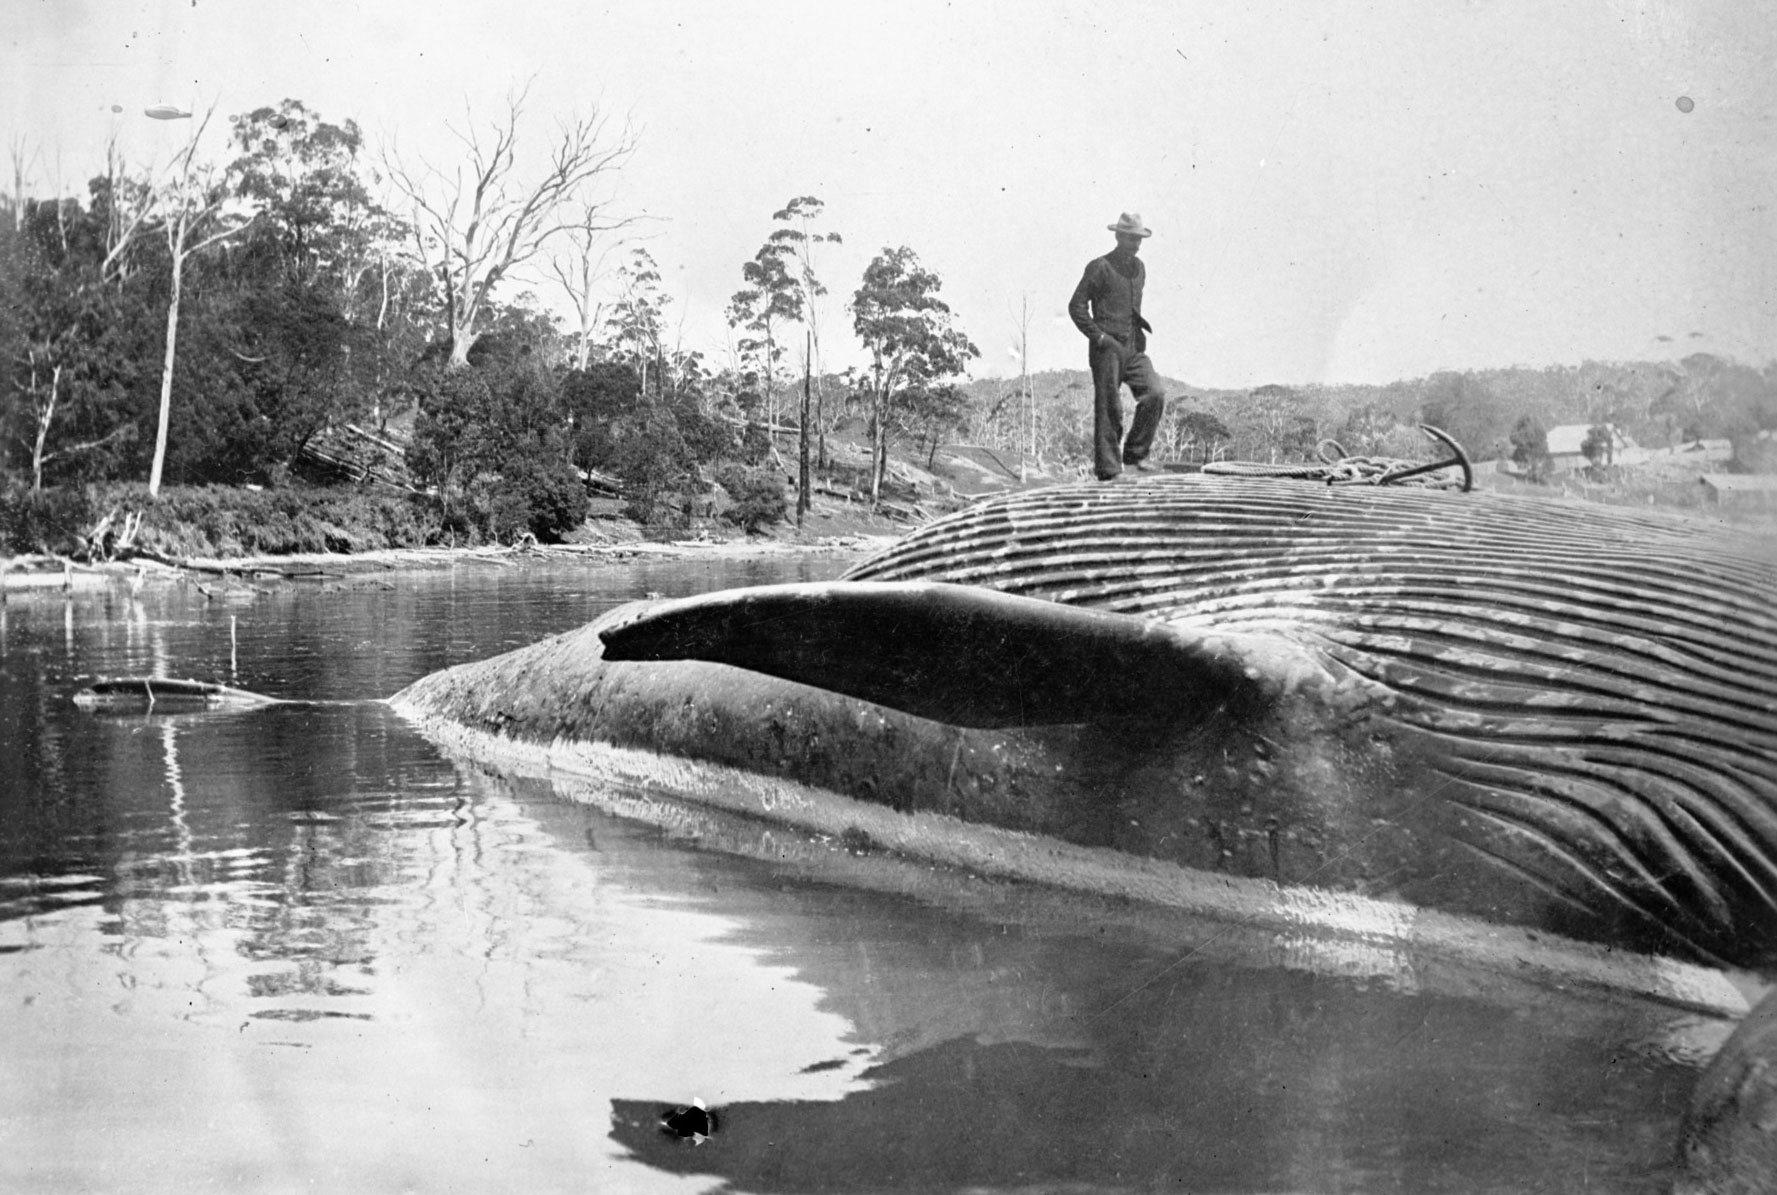 <p>A man on a dead whale, Twofold Bay, New South Wales</p>
